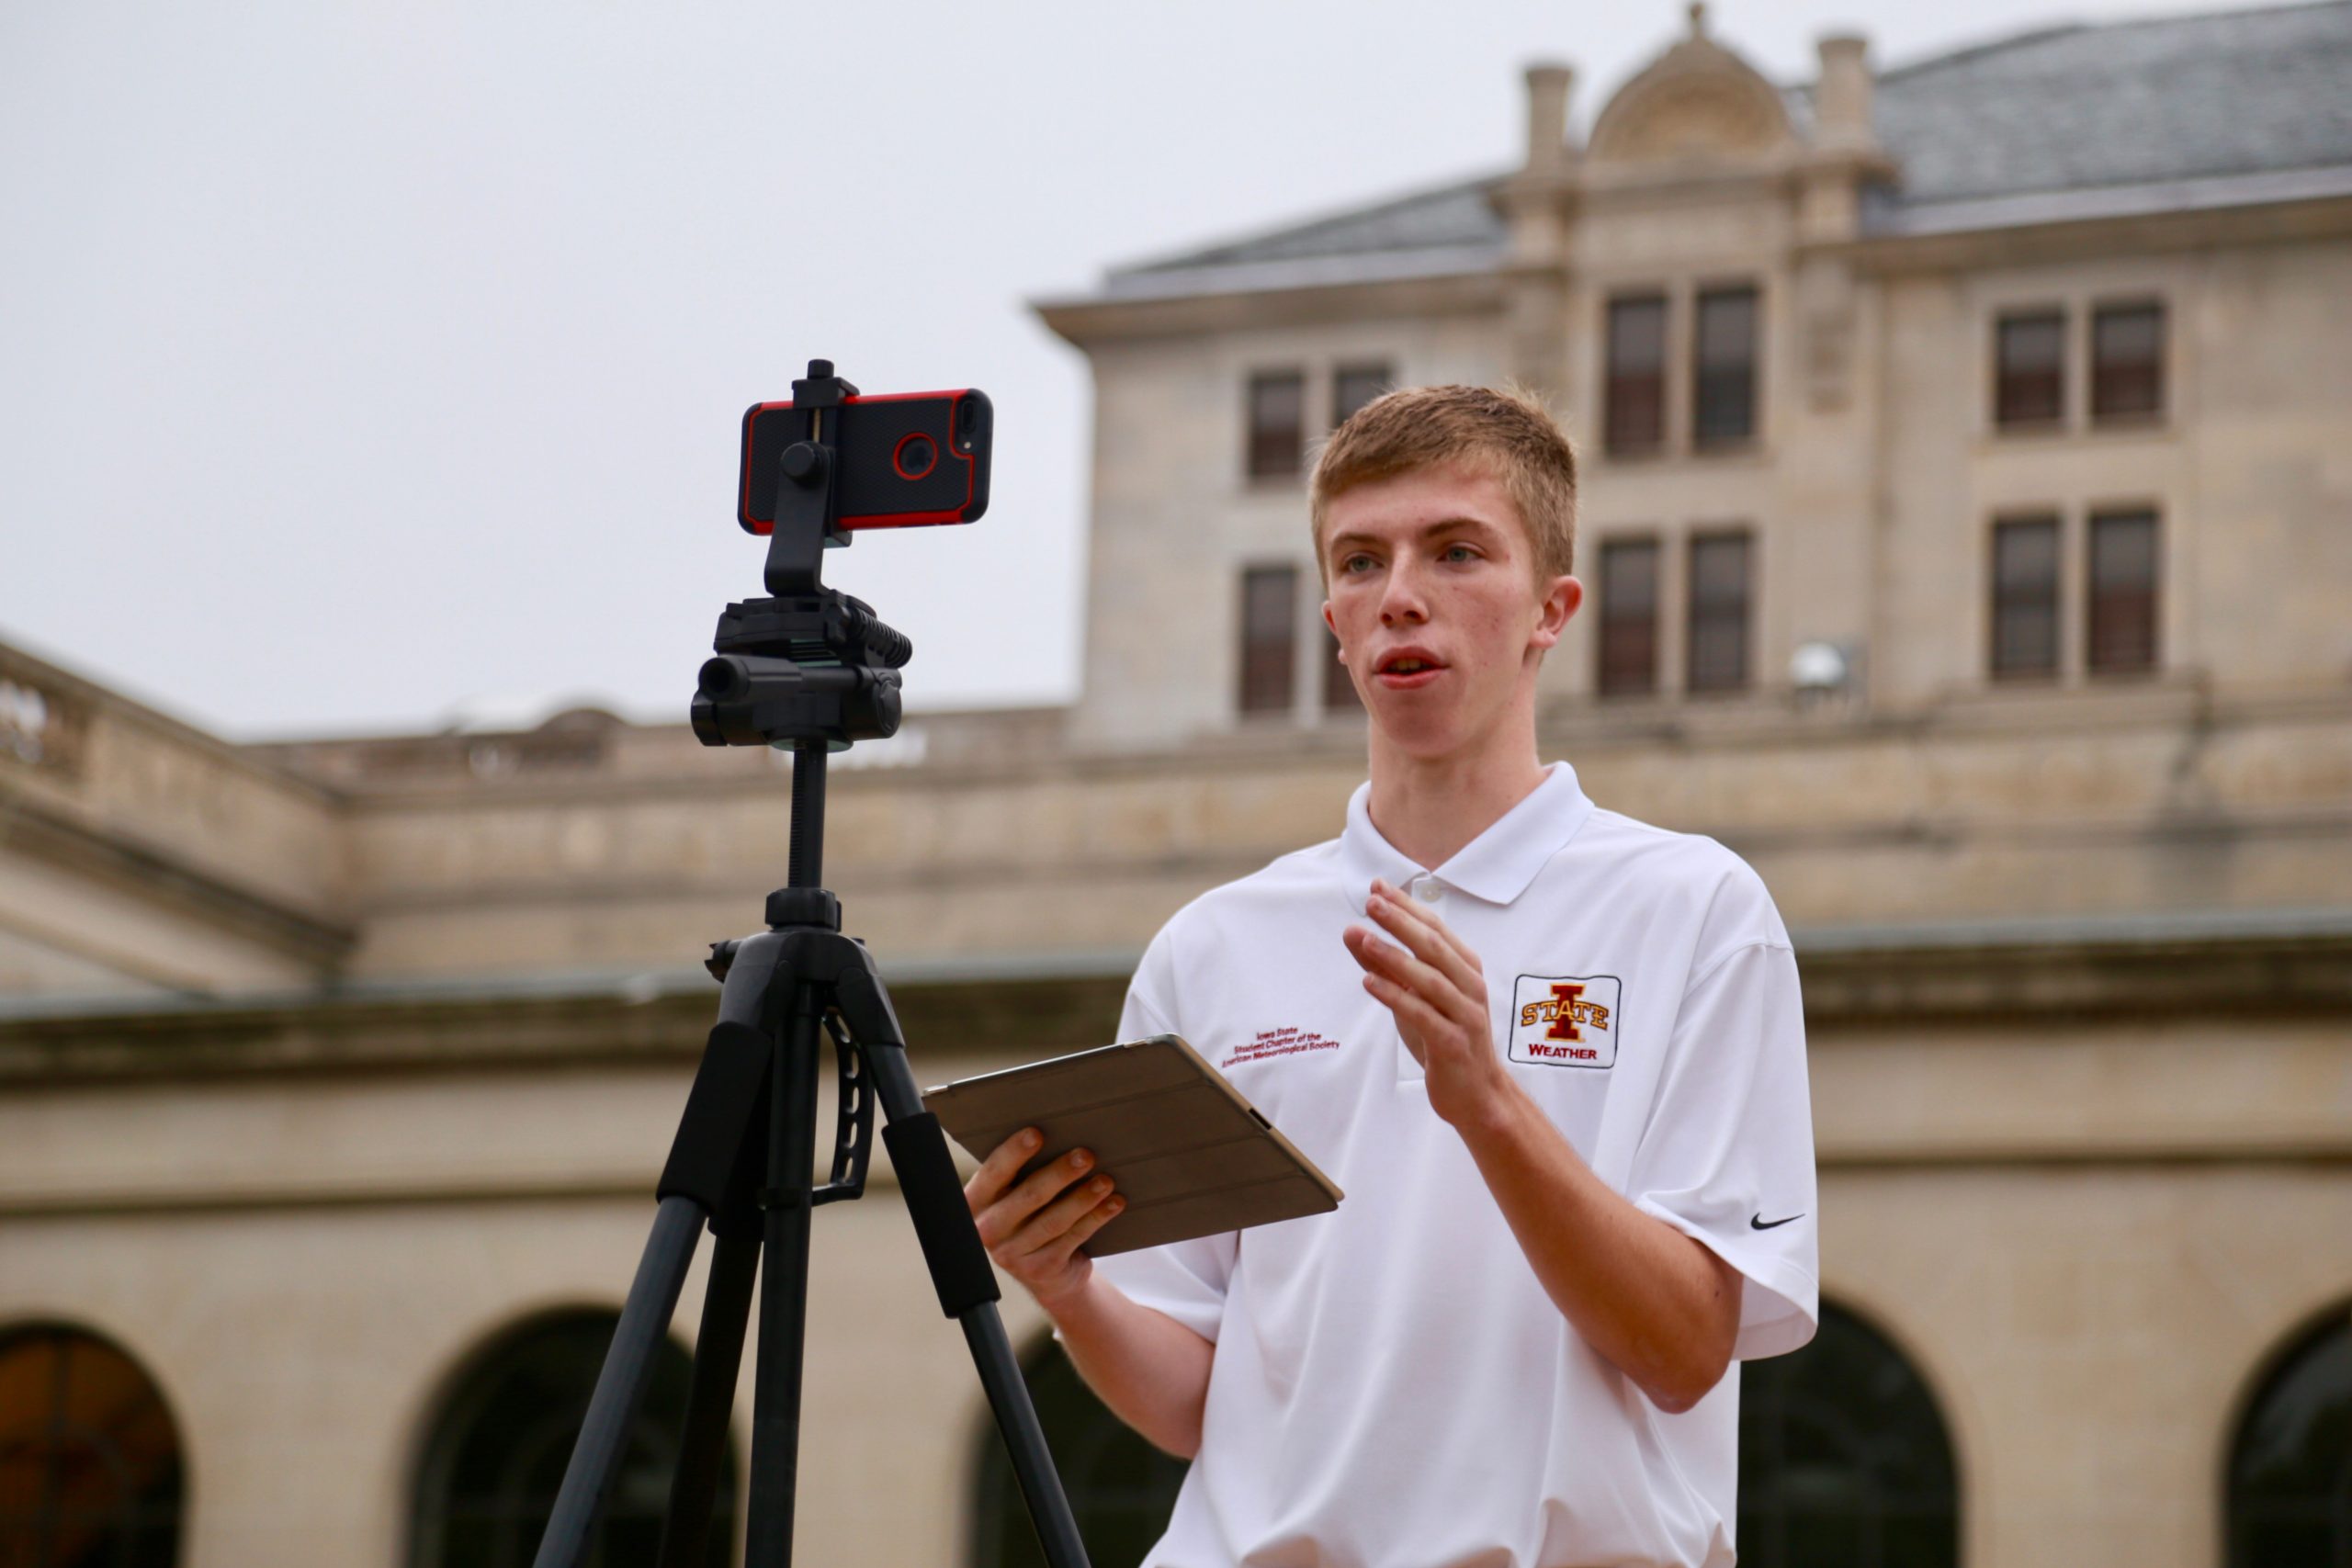 Senior Jacob Vos reporting the weather on campus.